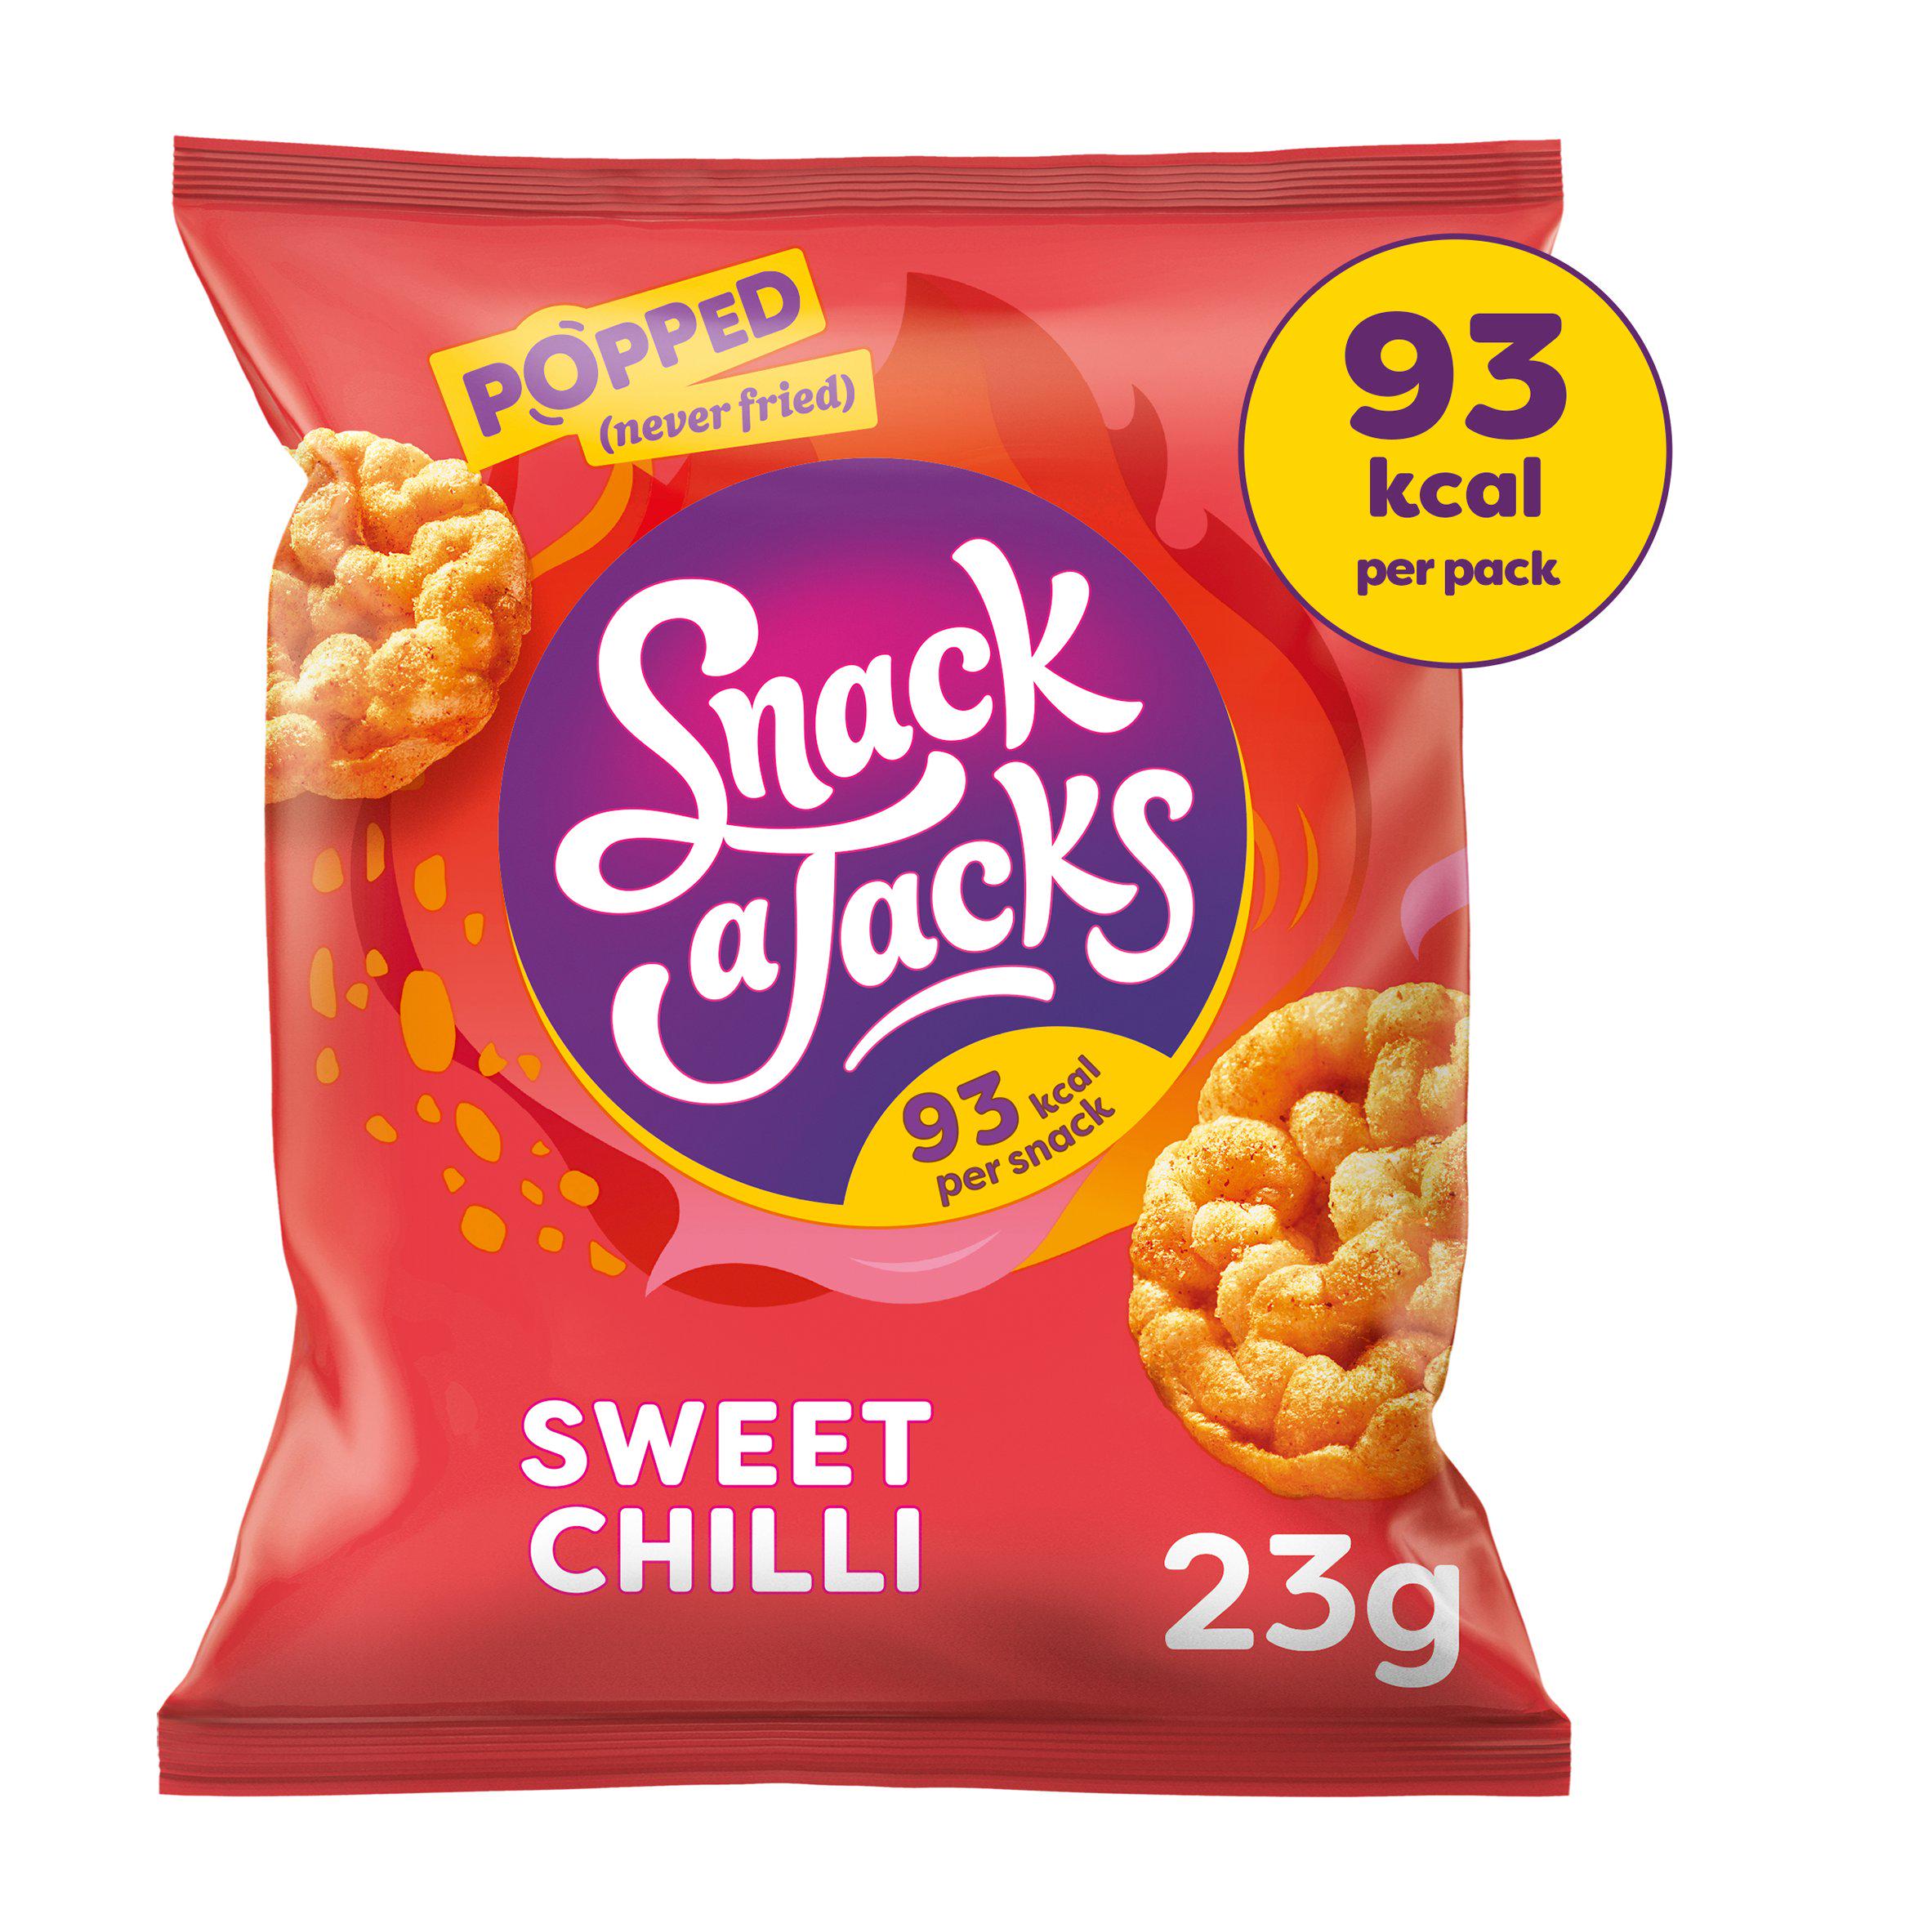 Snack a Jacks Rice Cakes Sweet Chilli 23g - McGrocer